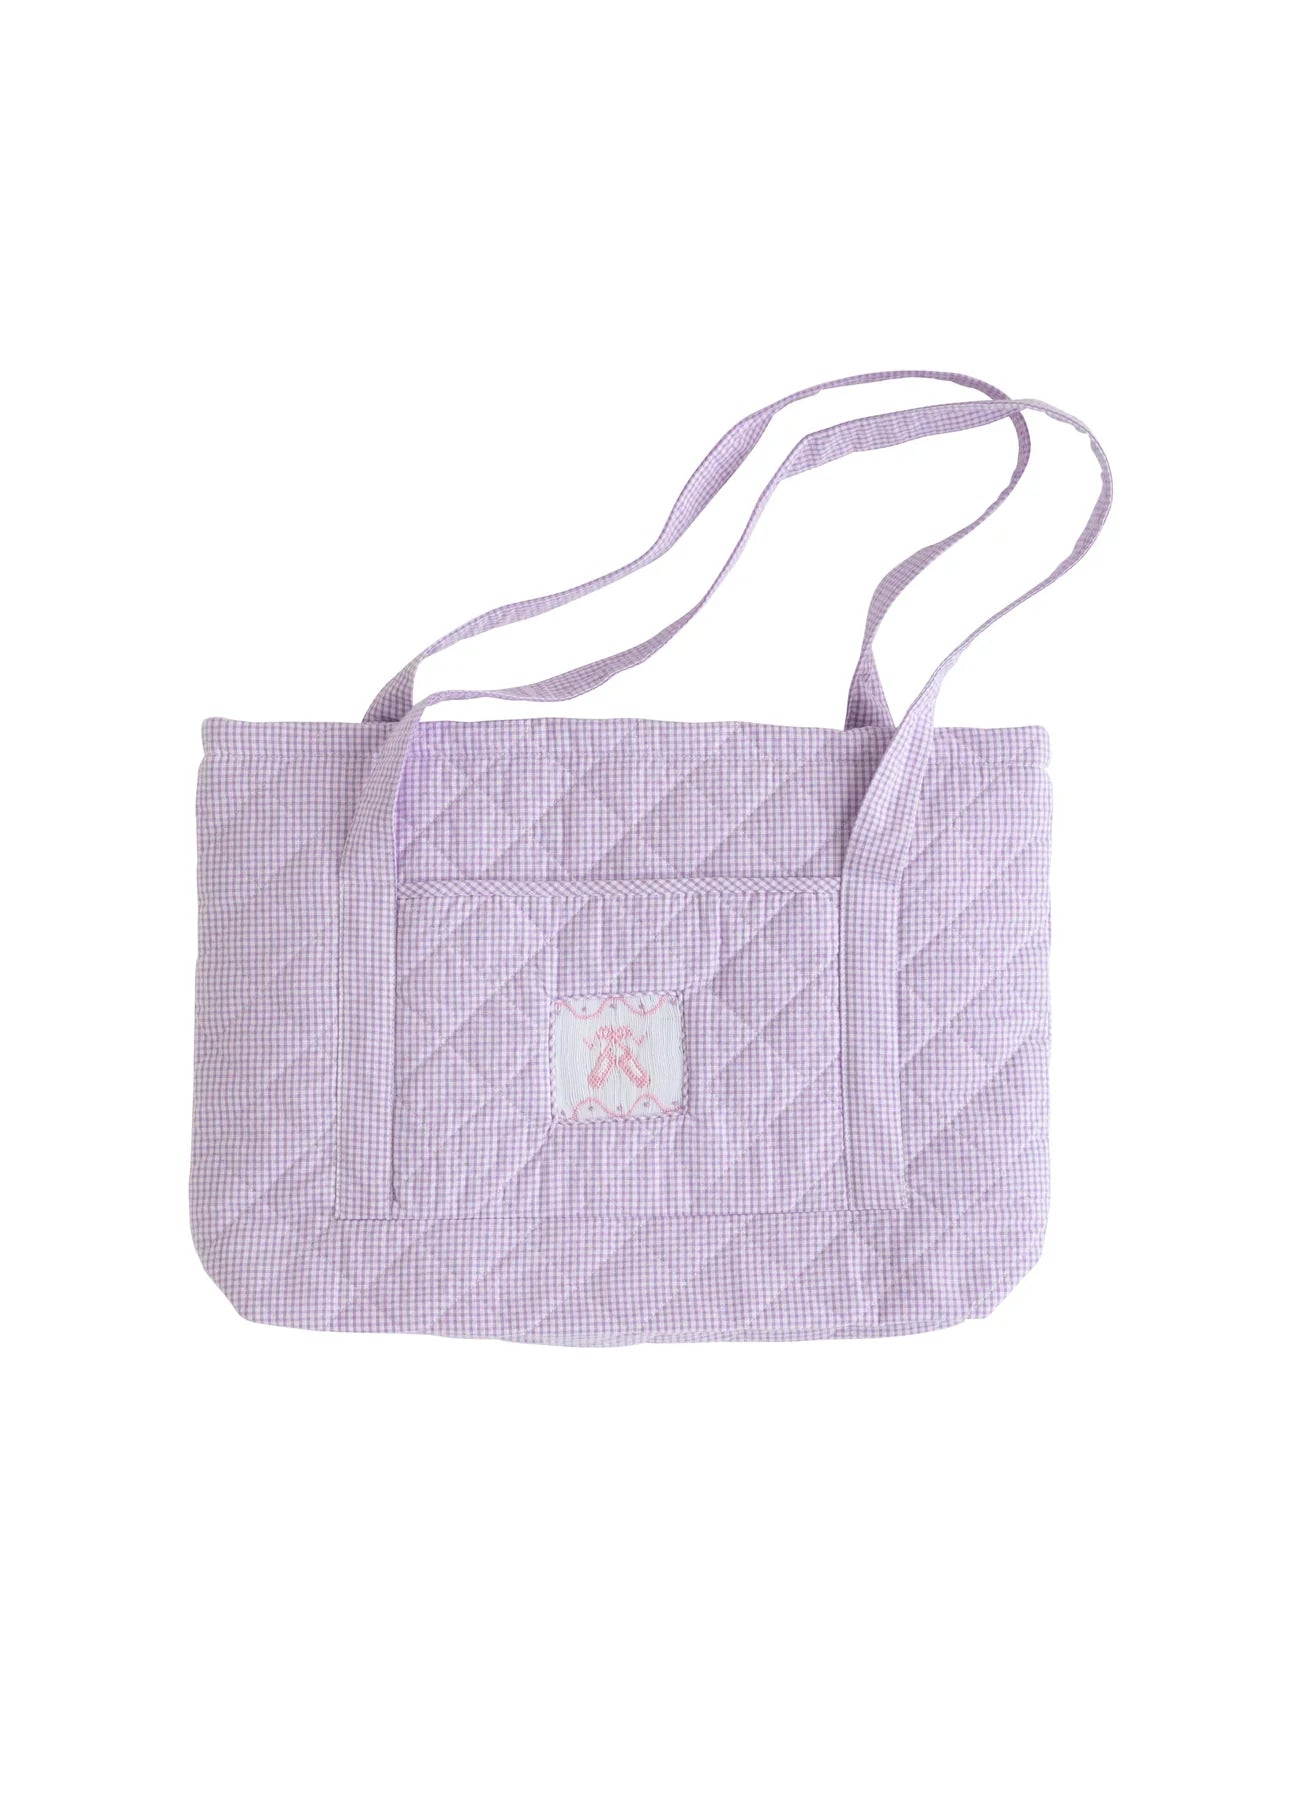 Quilted Luggage Tote Bag - Ballet Slipper